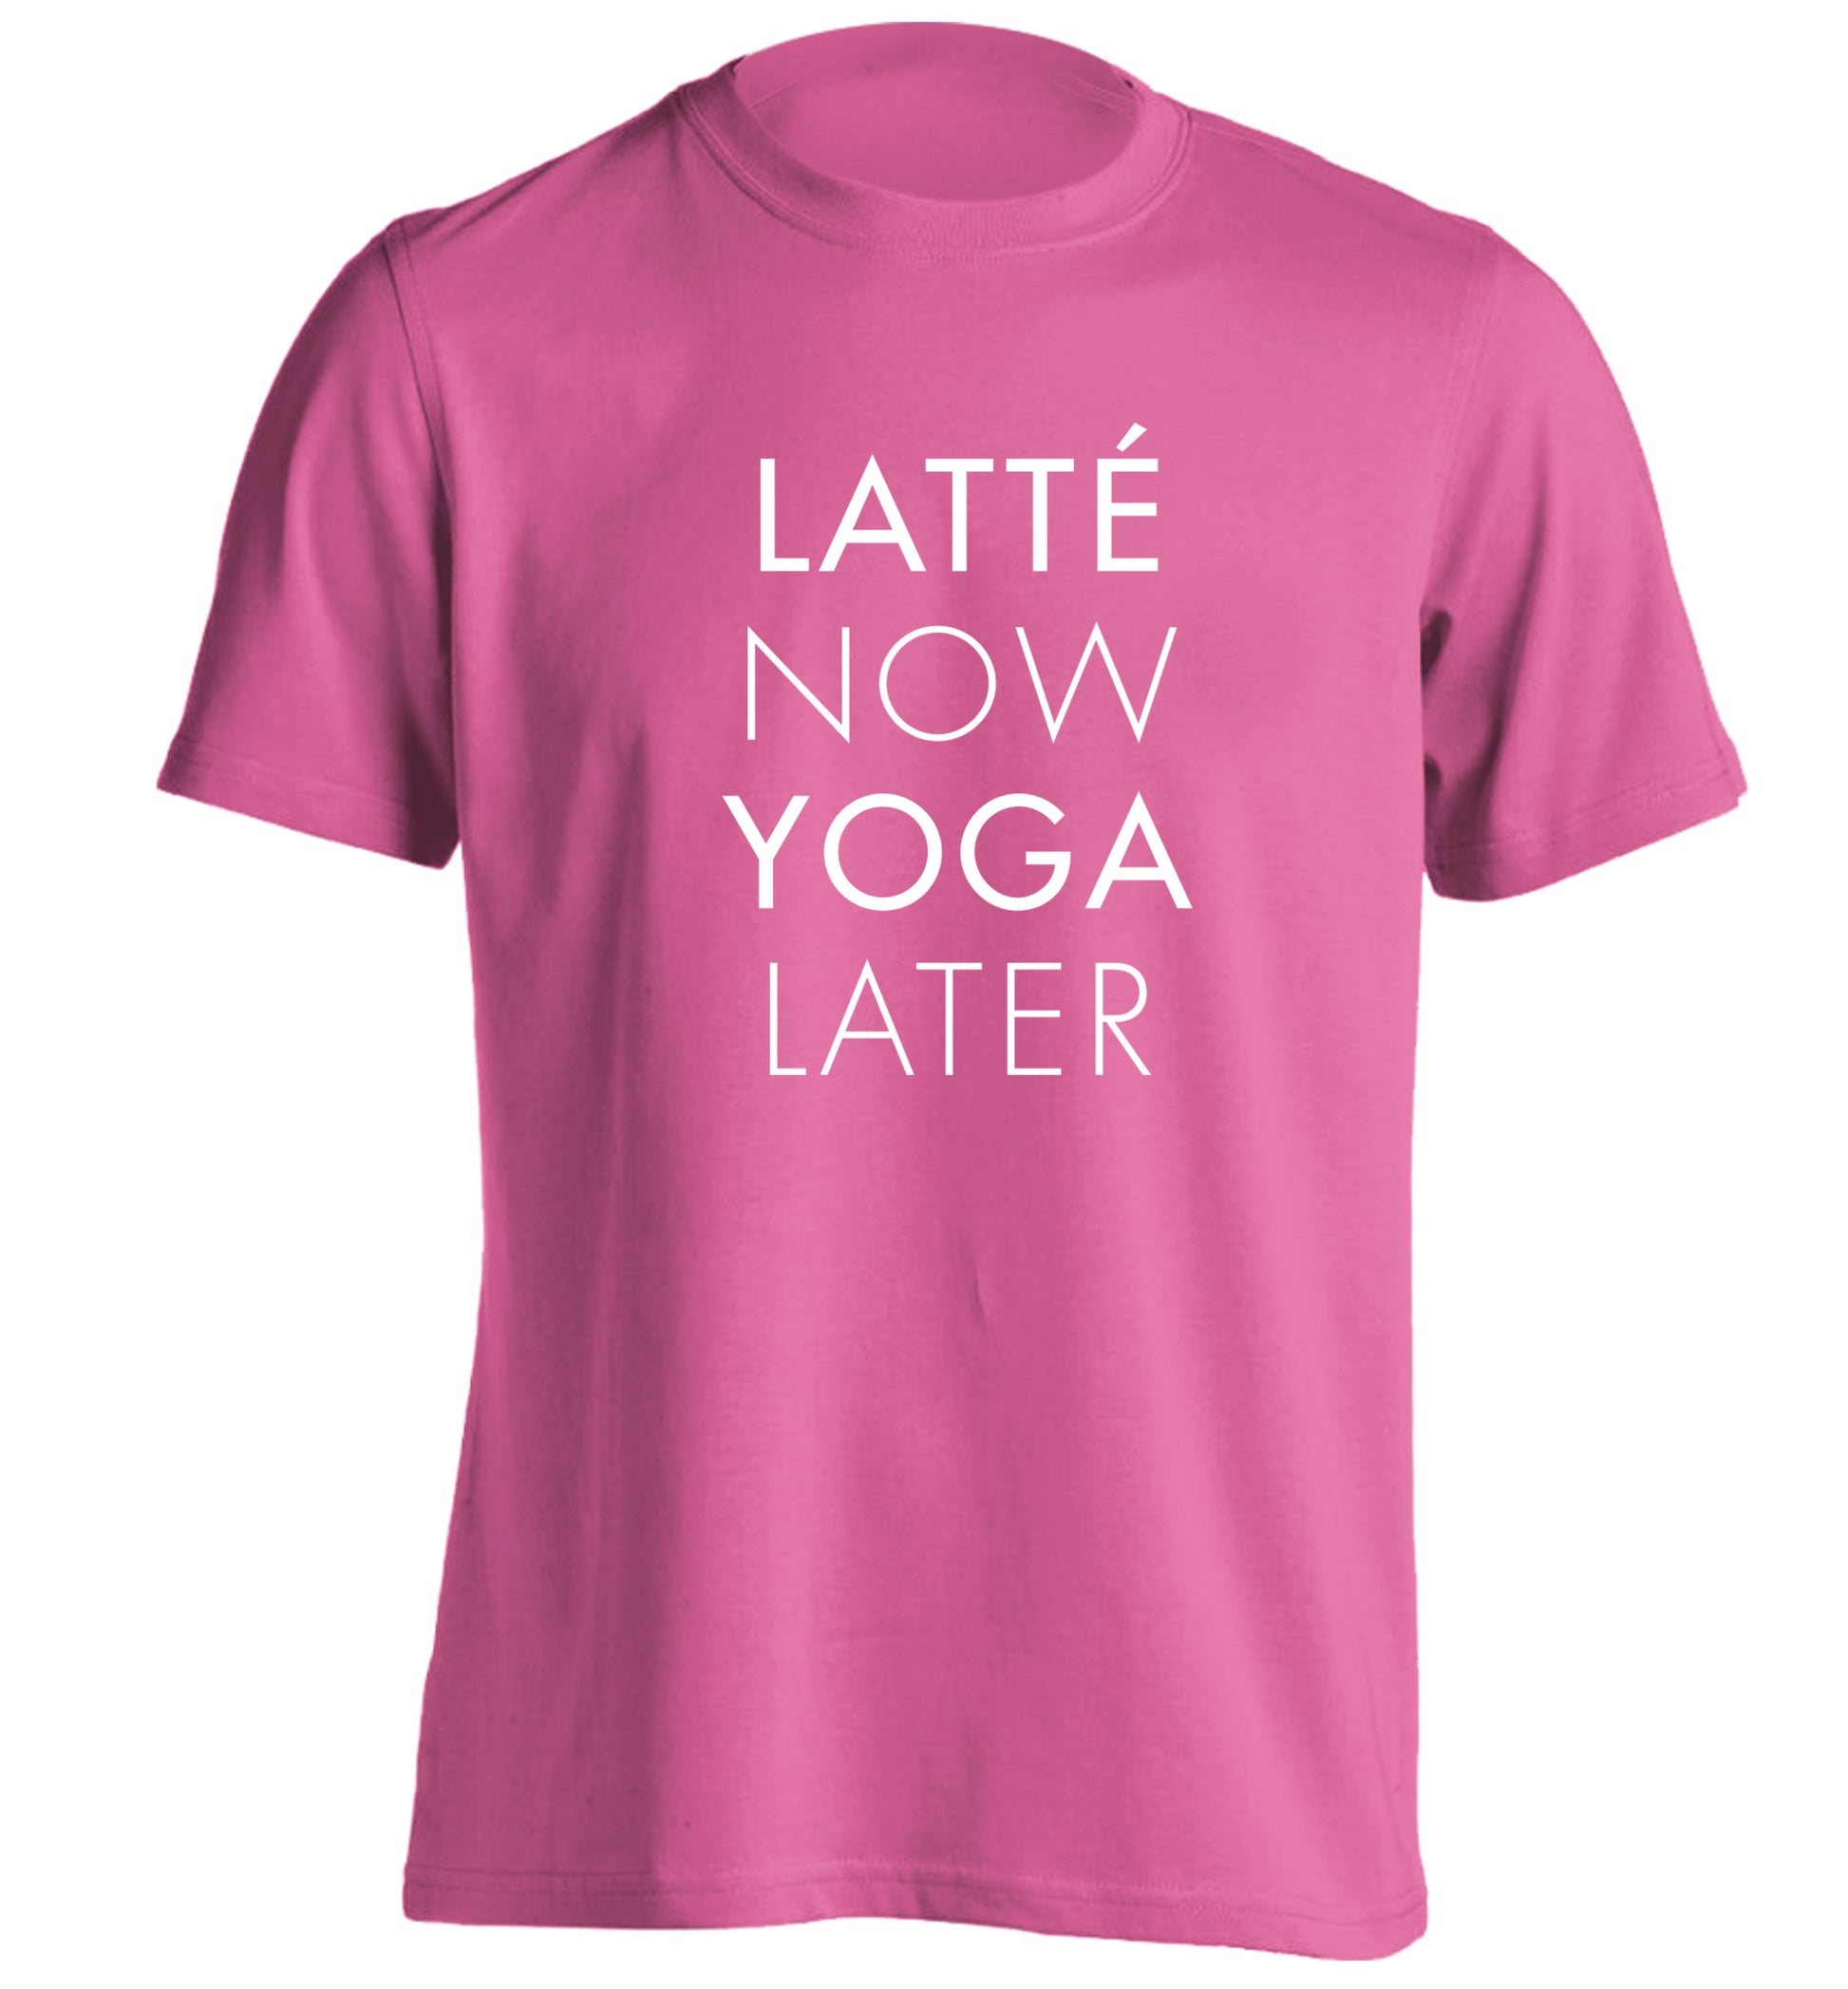 Latte now yoga later adults unisex pink Tshirt 2XL